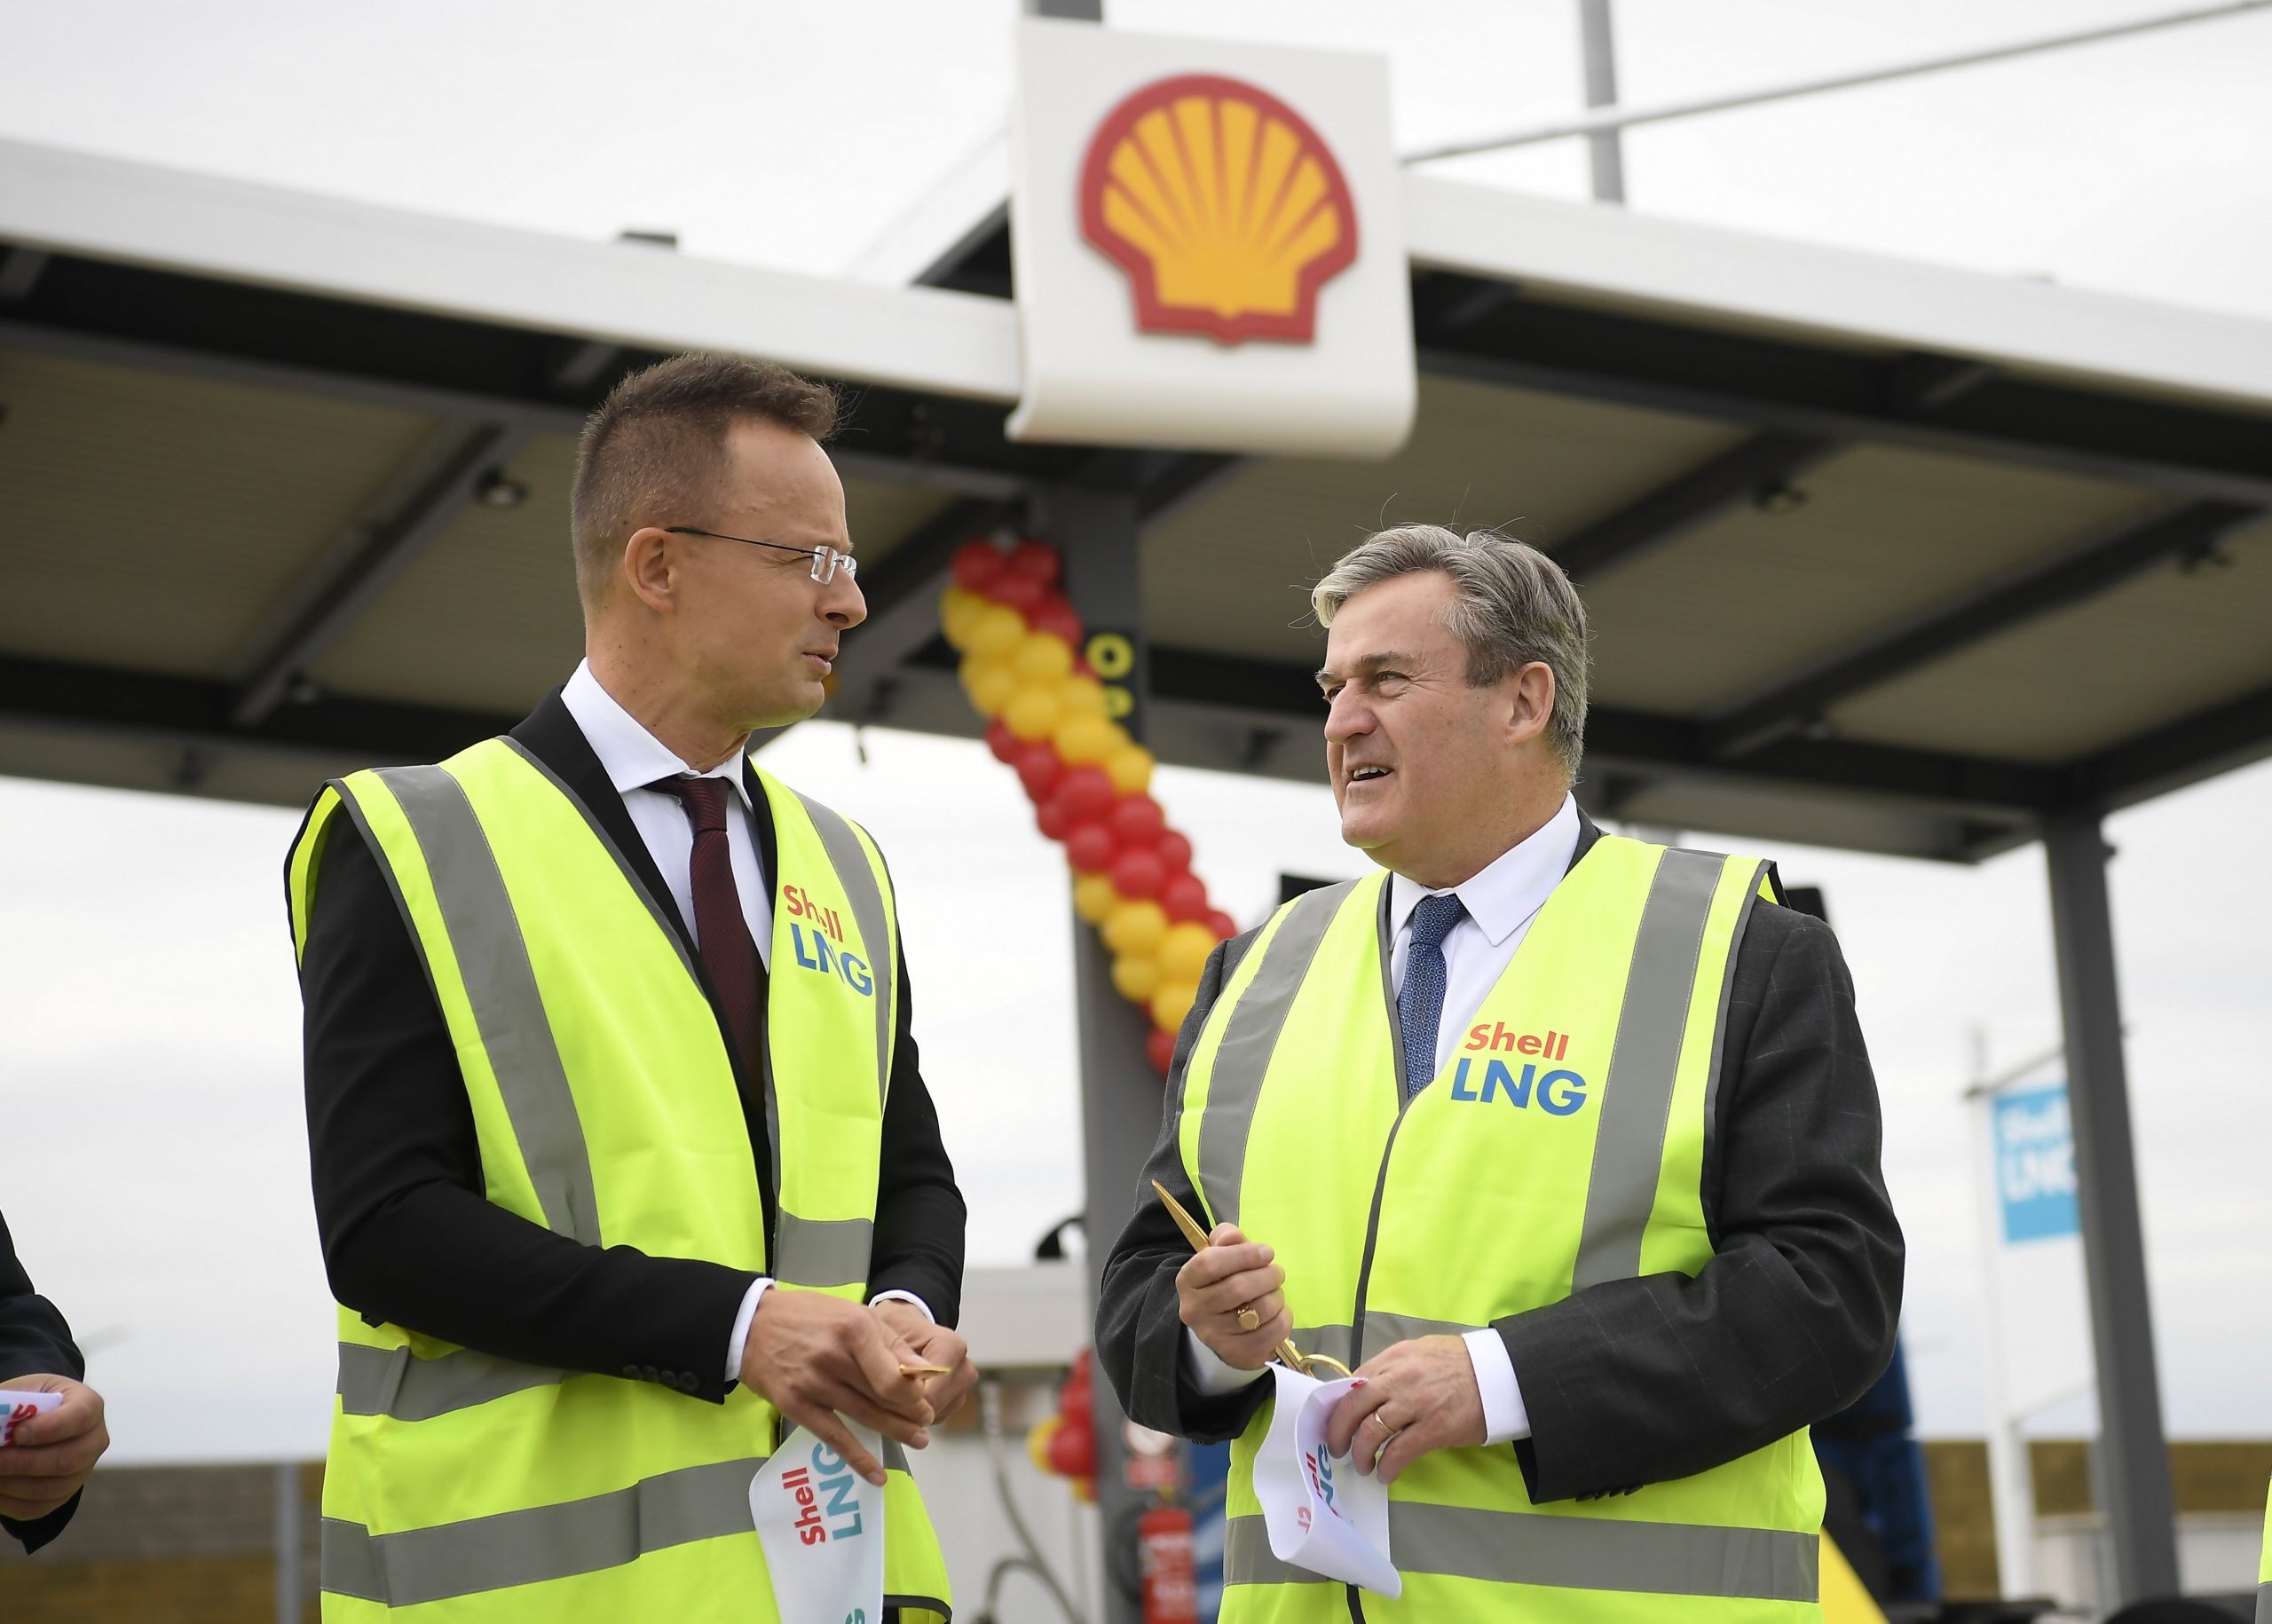 Shell Opens Region's First LNG Filling Station in Hungary